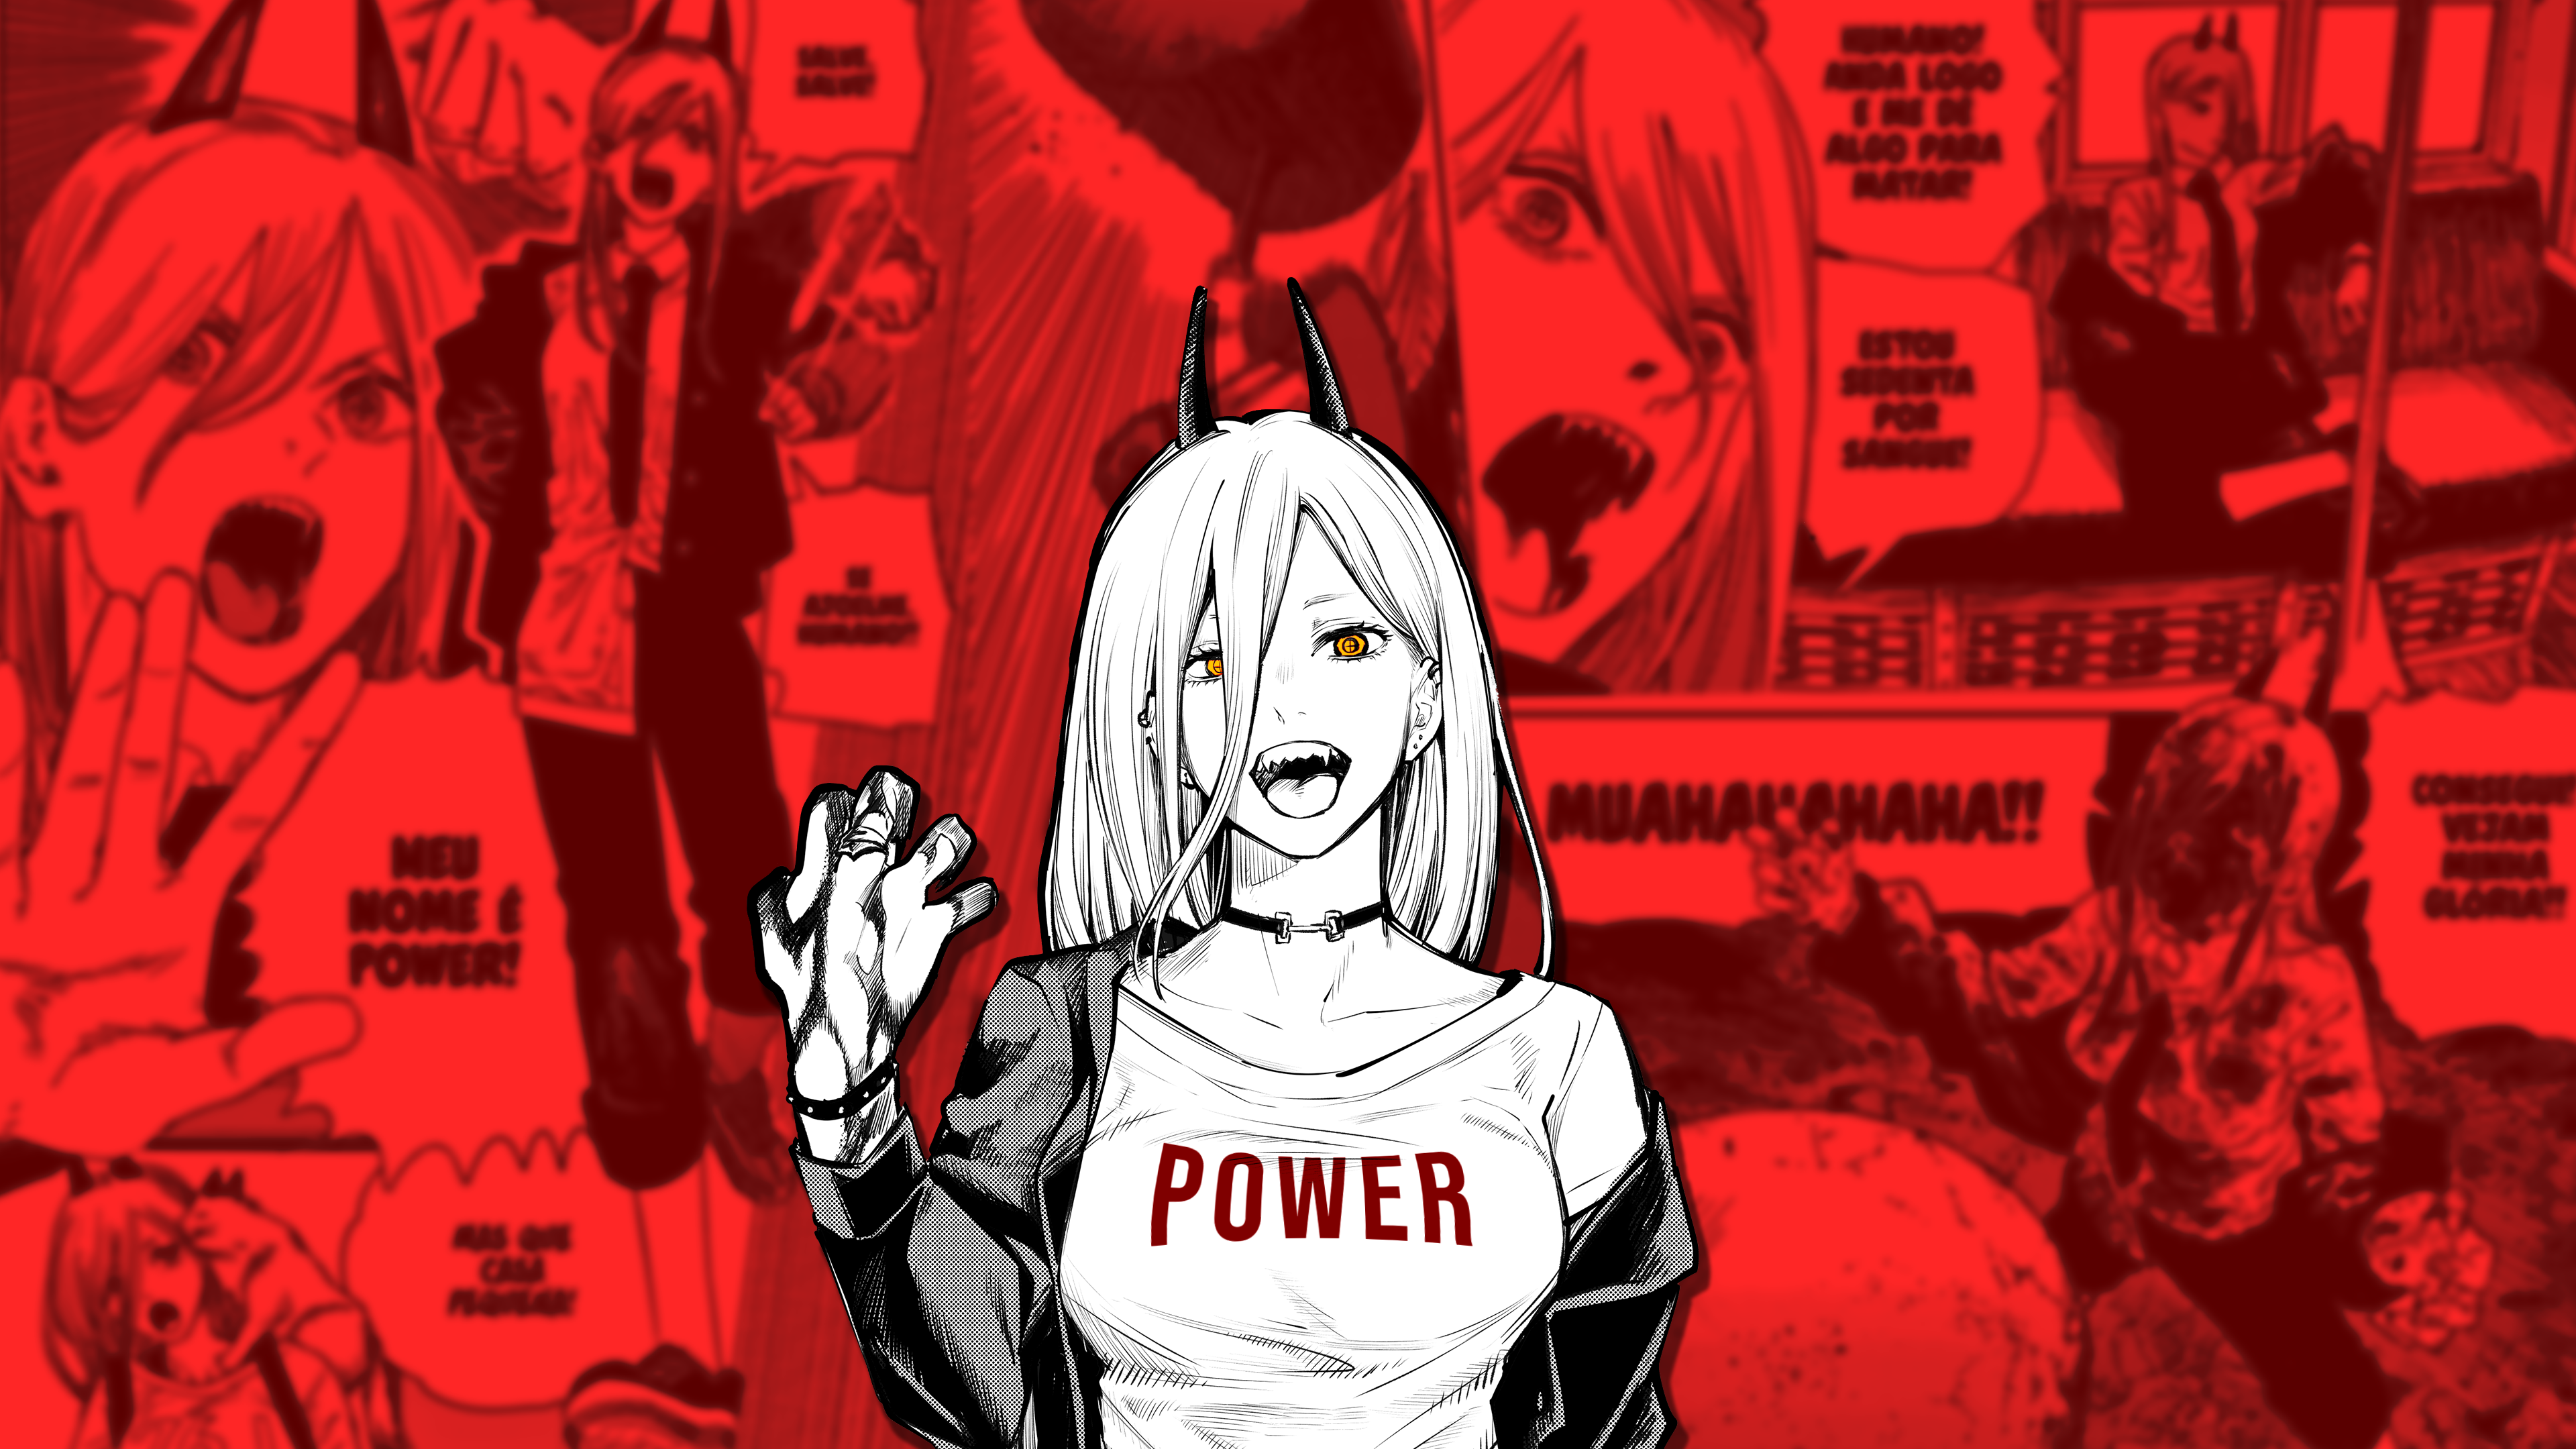 Anime 3840x2160 Power (Chainsaw Man) Chainsaw Man manga anime girls red red background picture-in-picture